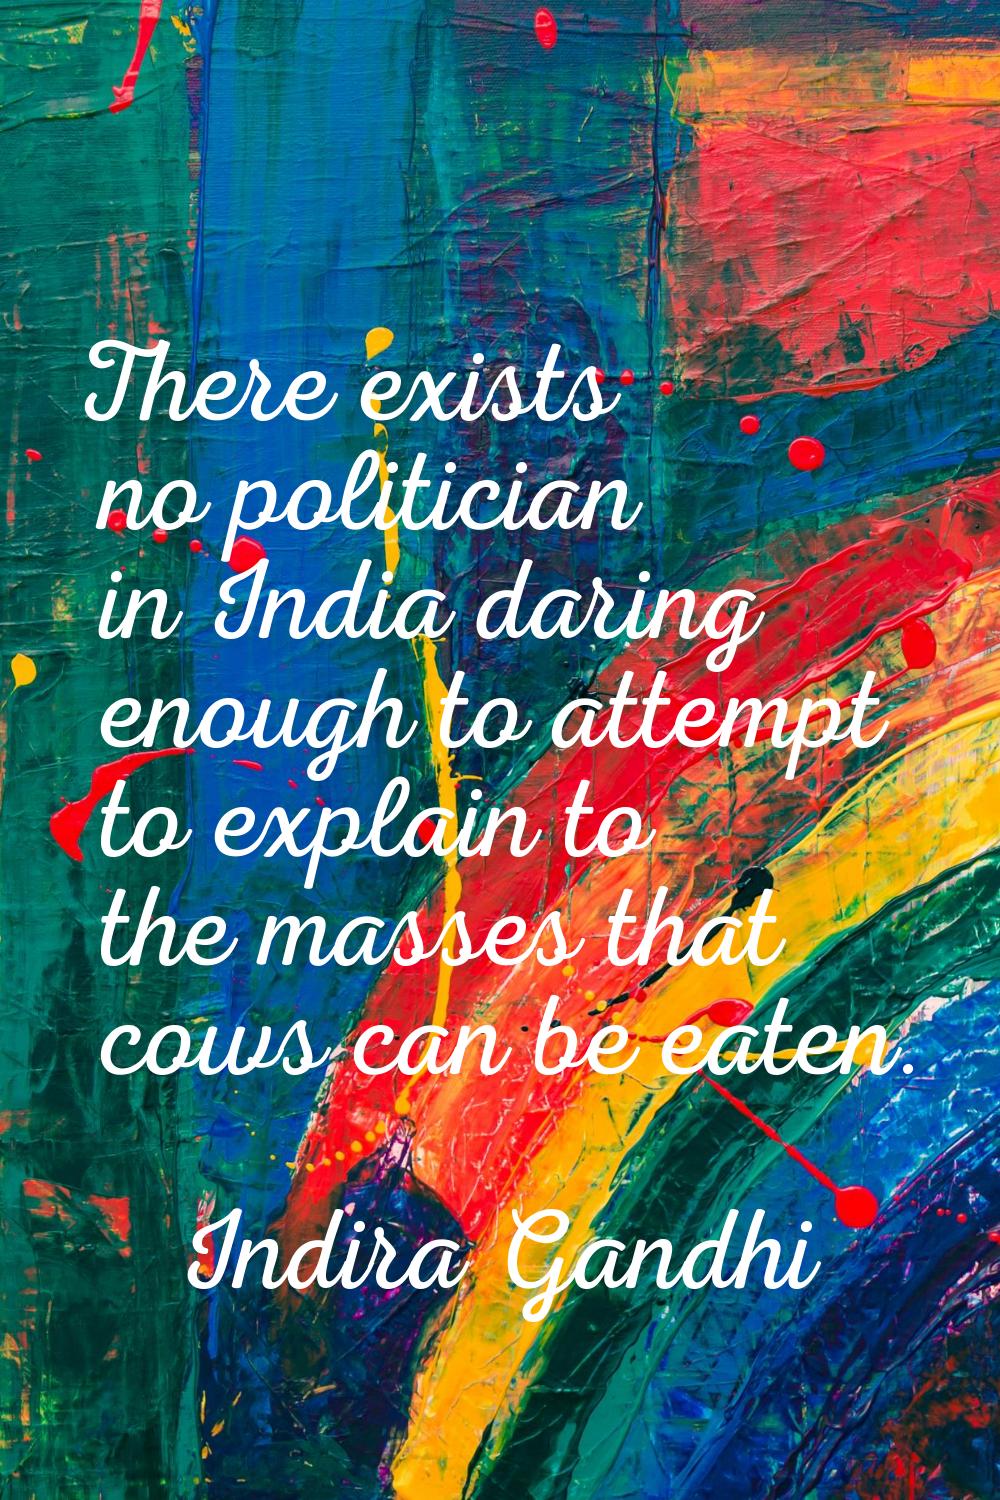 There exists no politician in India daring enough to attempt to explain to the masses that cows can